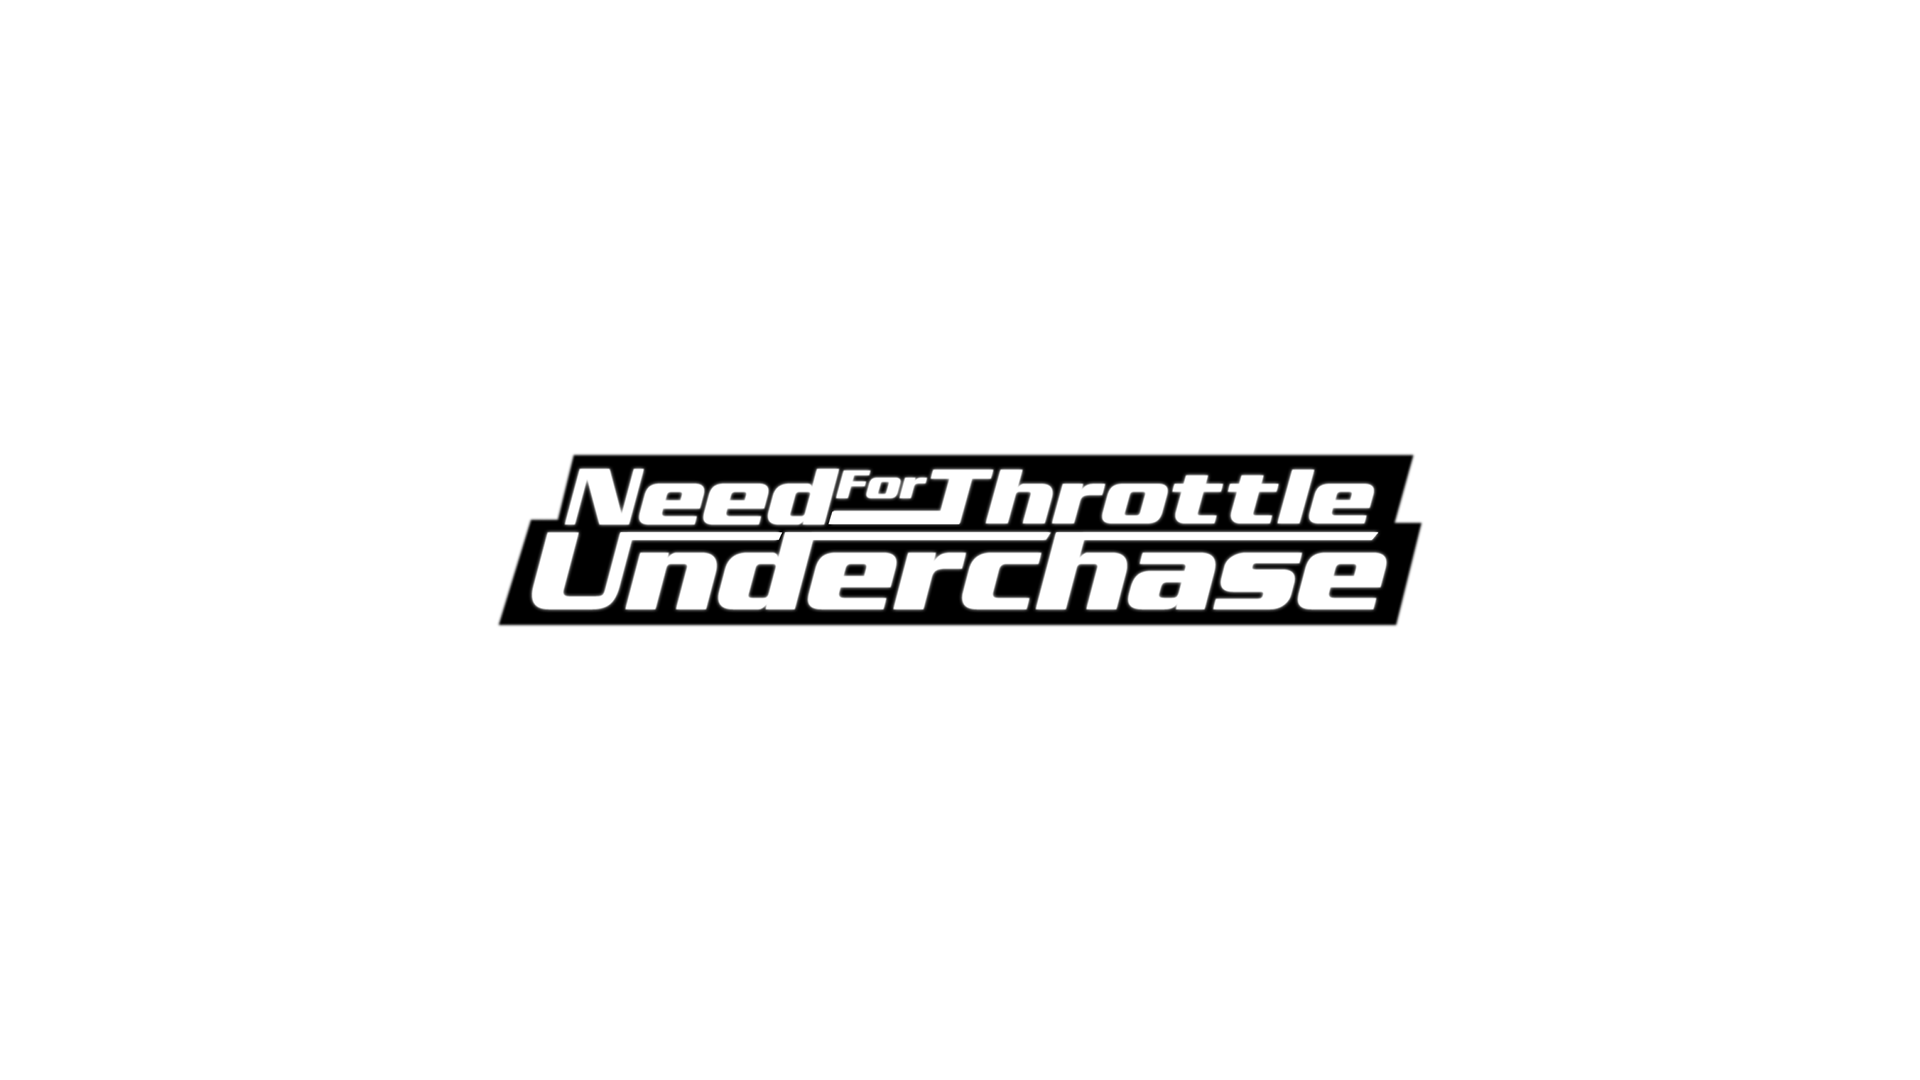 Need For Throttle Underchase